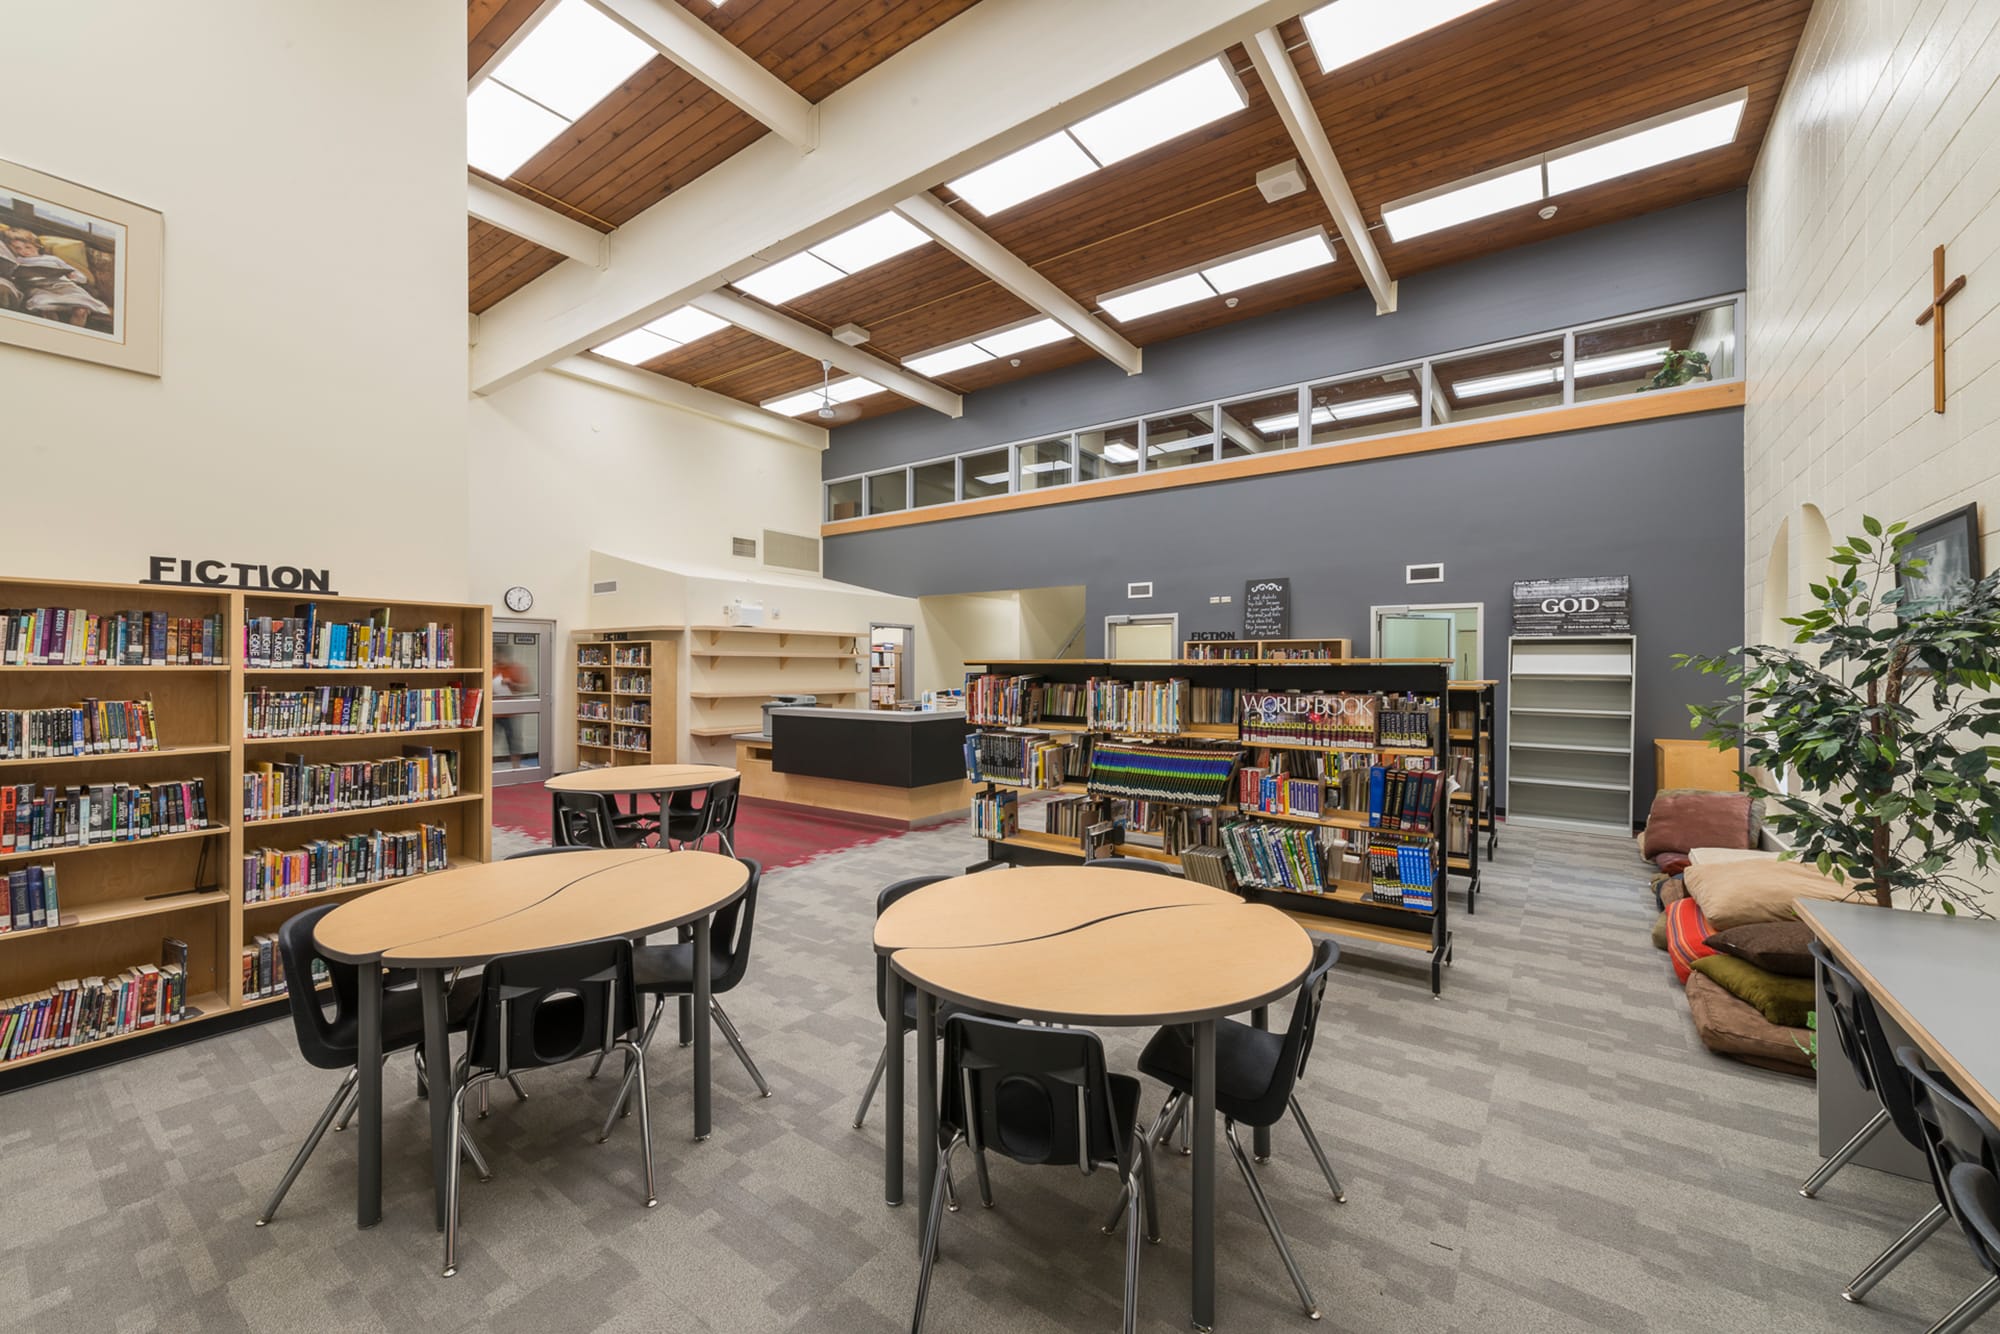 Our Lady of Mount Pleasant School interior library